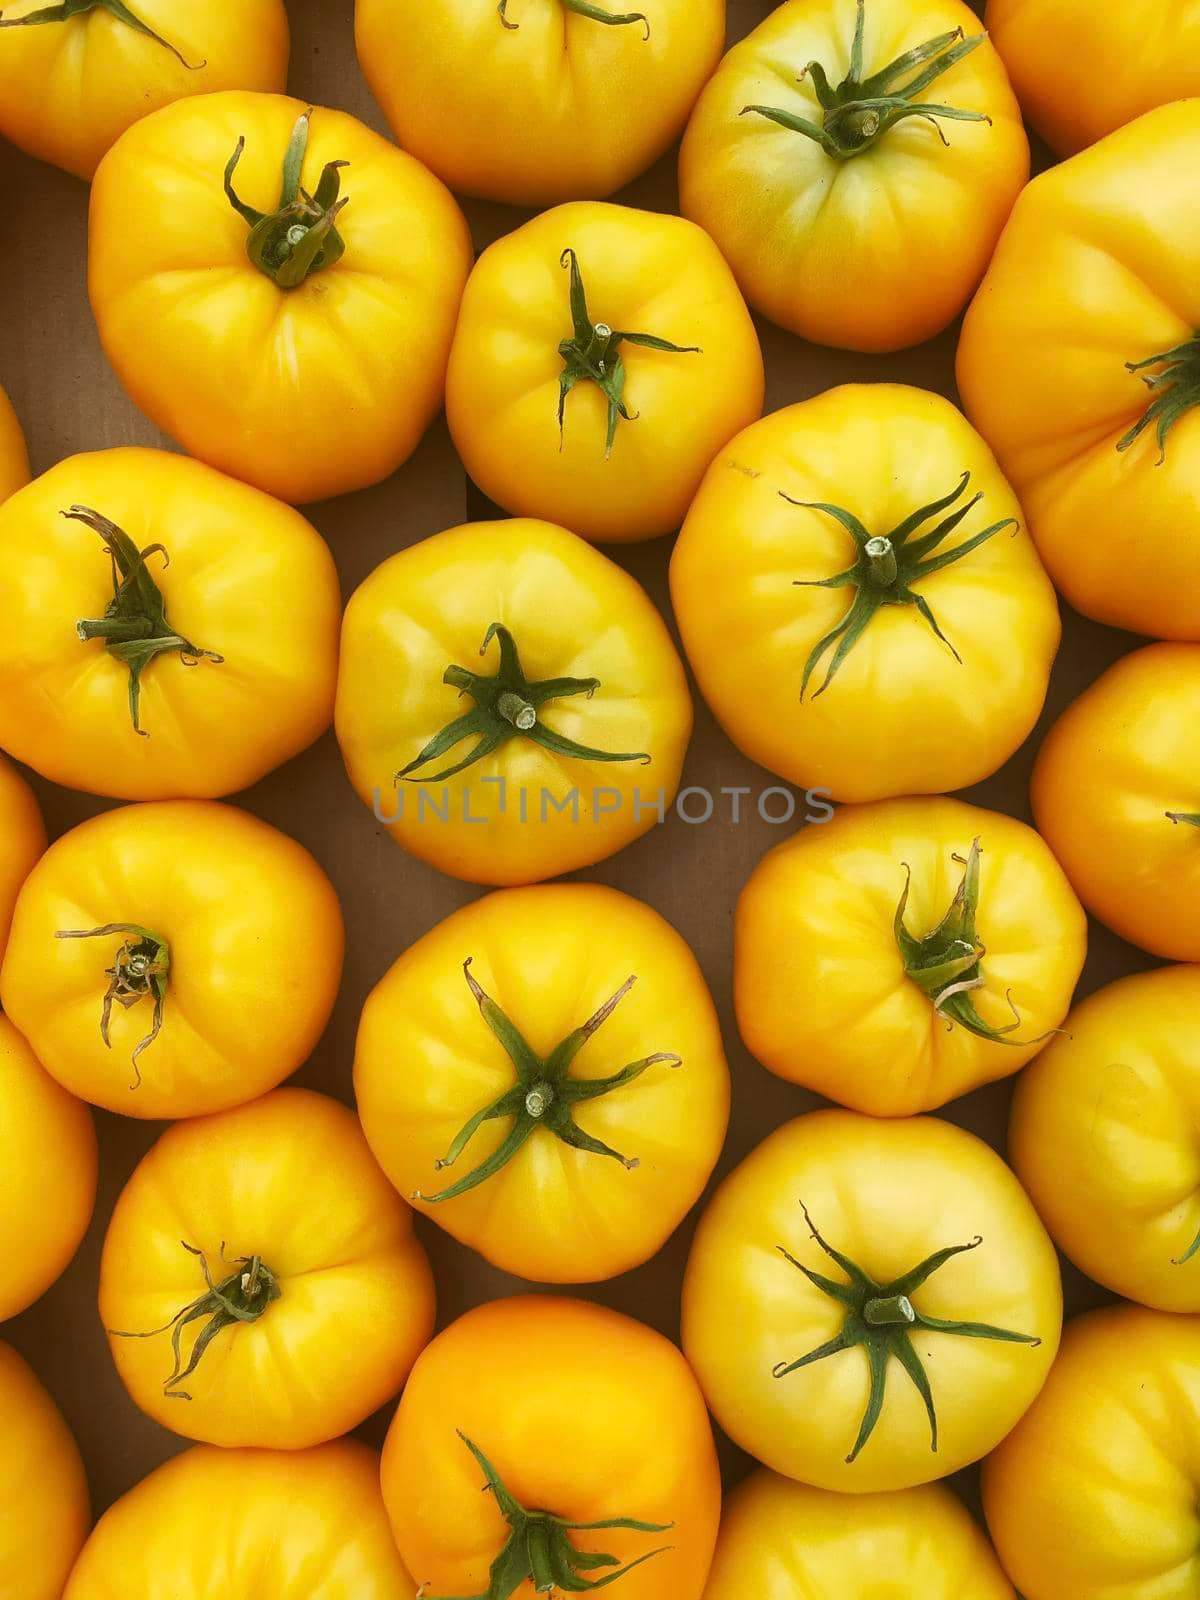 red and yellow tomatoes in boxes at the farmers market.selective focus by mila1784